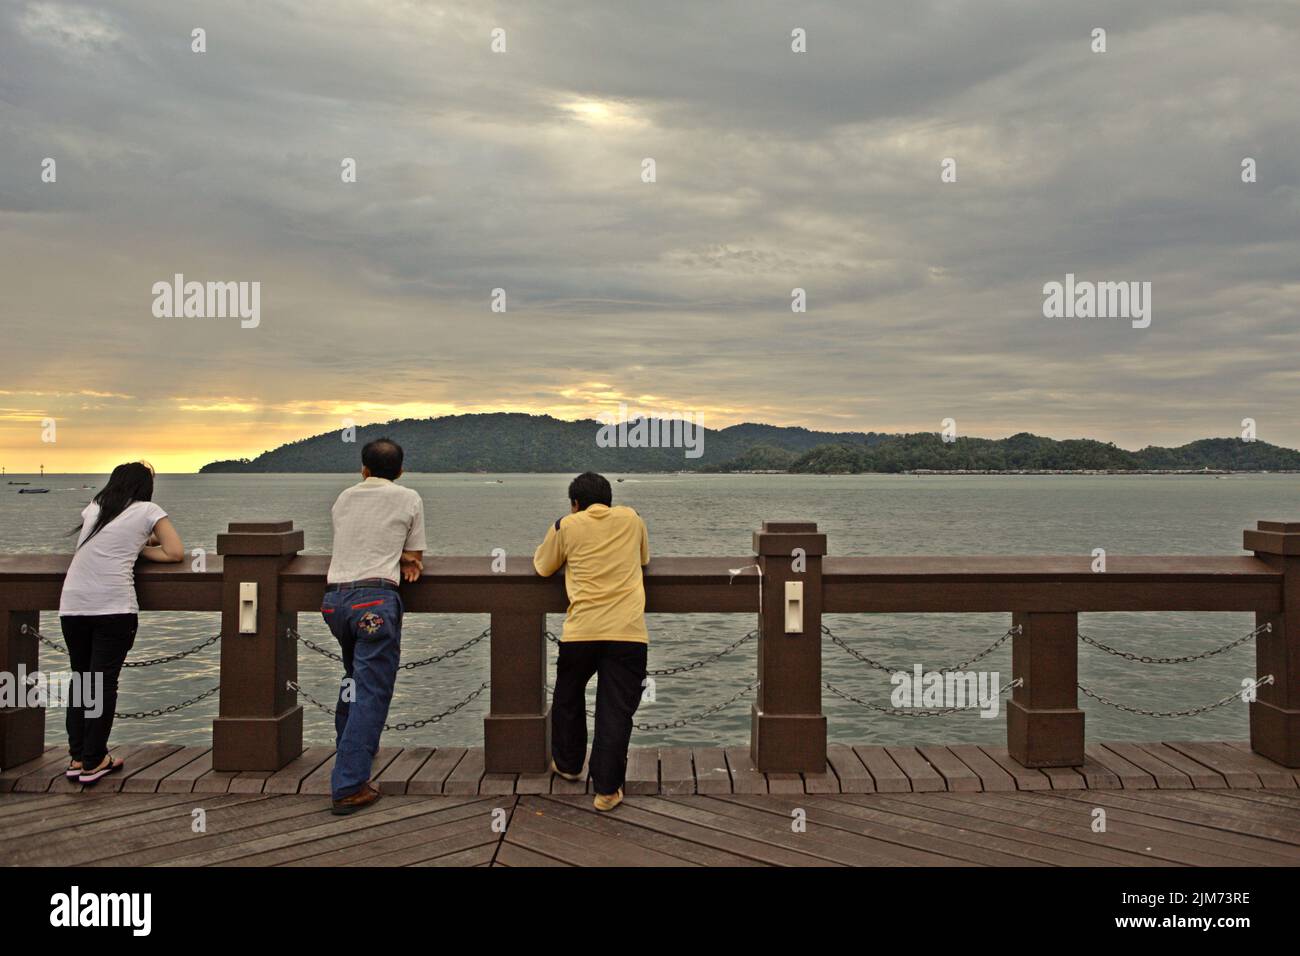 People enjoying afternoon seascape view as they are having a leisure time on a seaside viewing platform in Kota Kinabalu, Sabah, Malaysia. Stock Photo